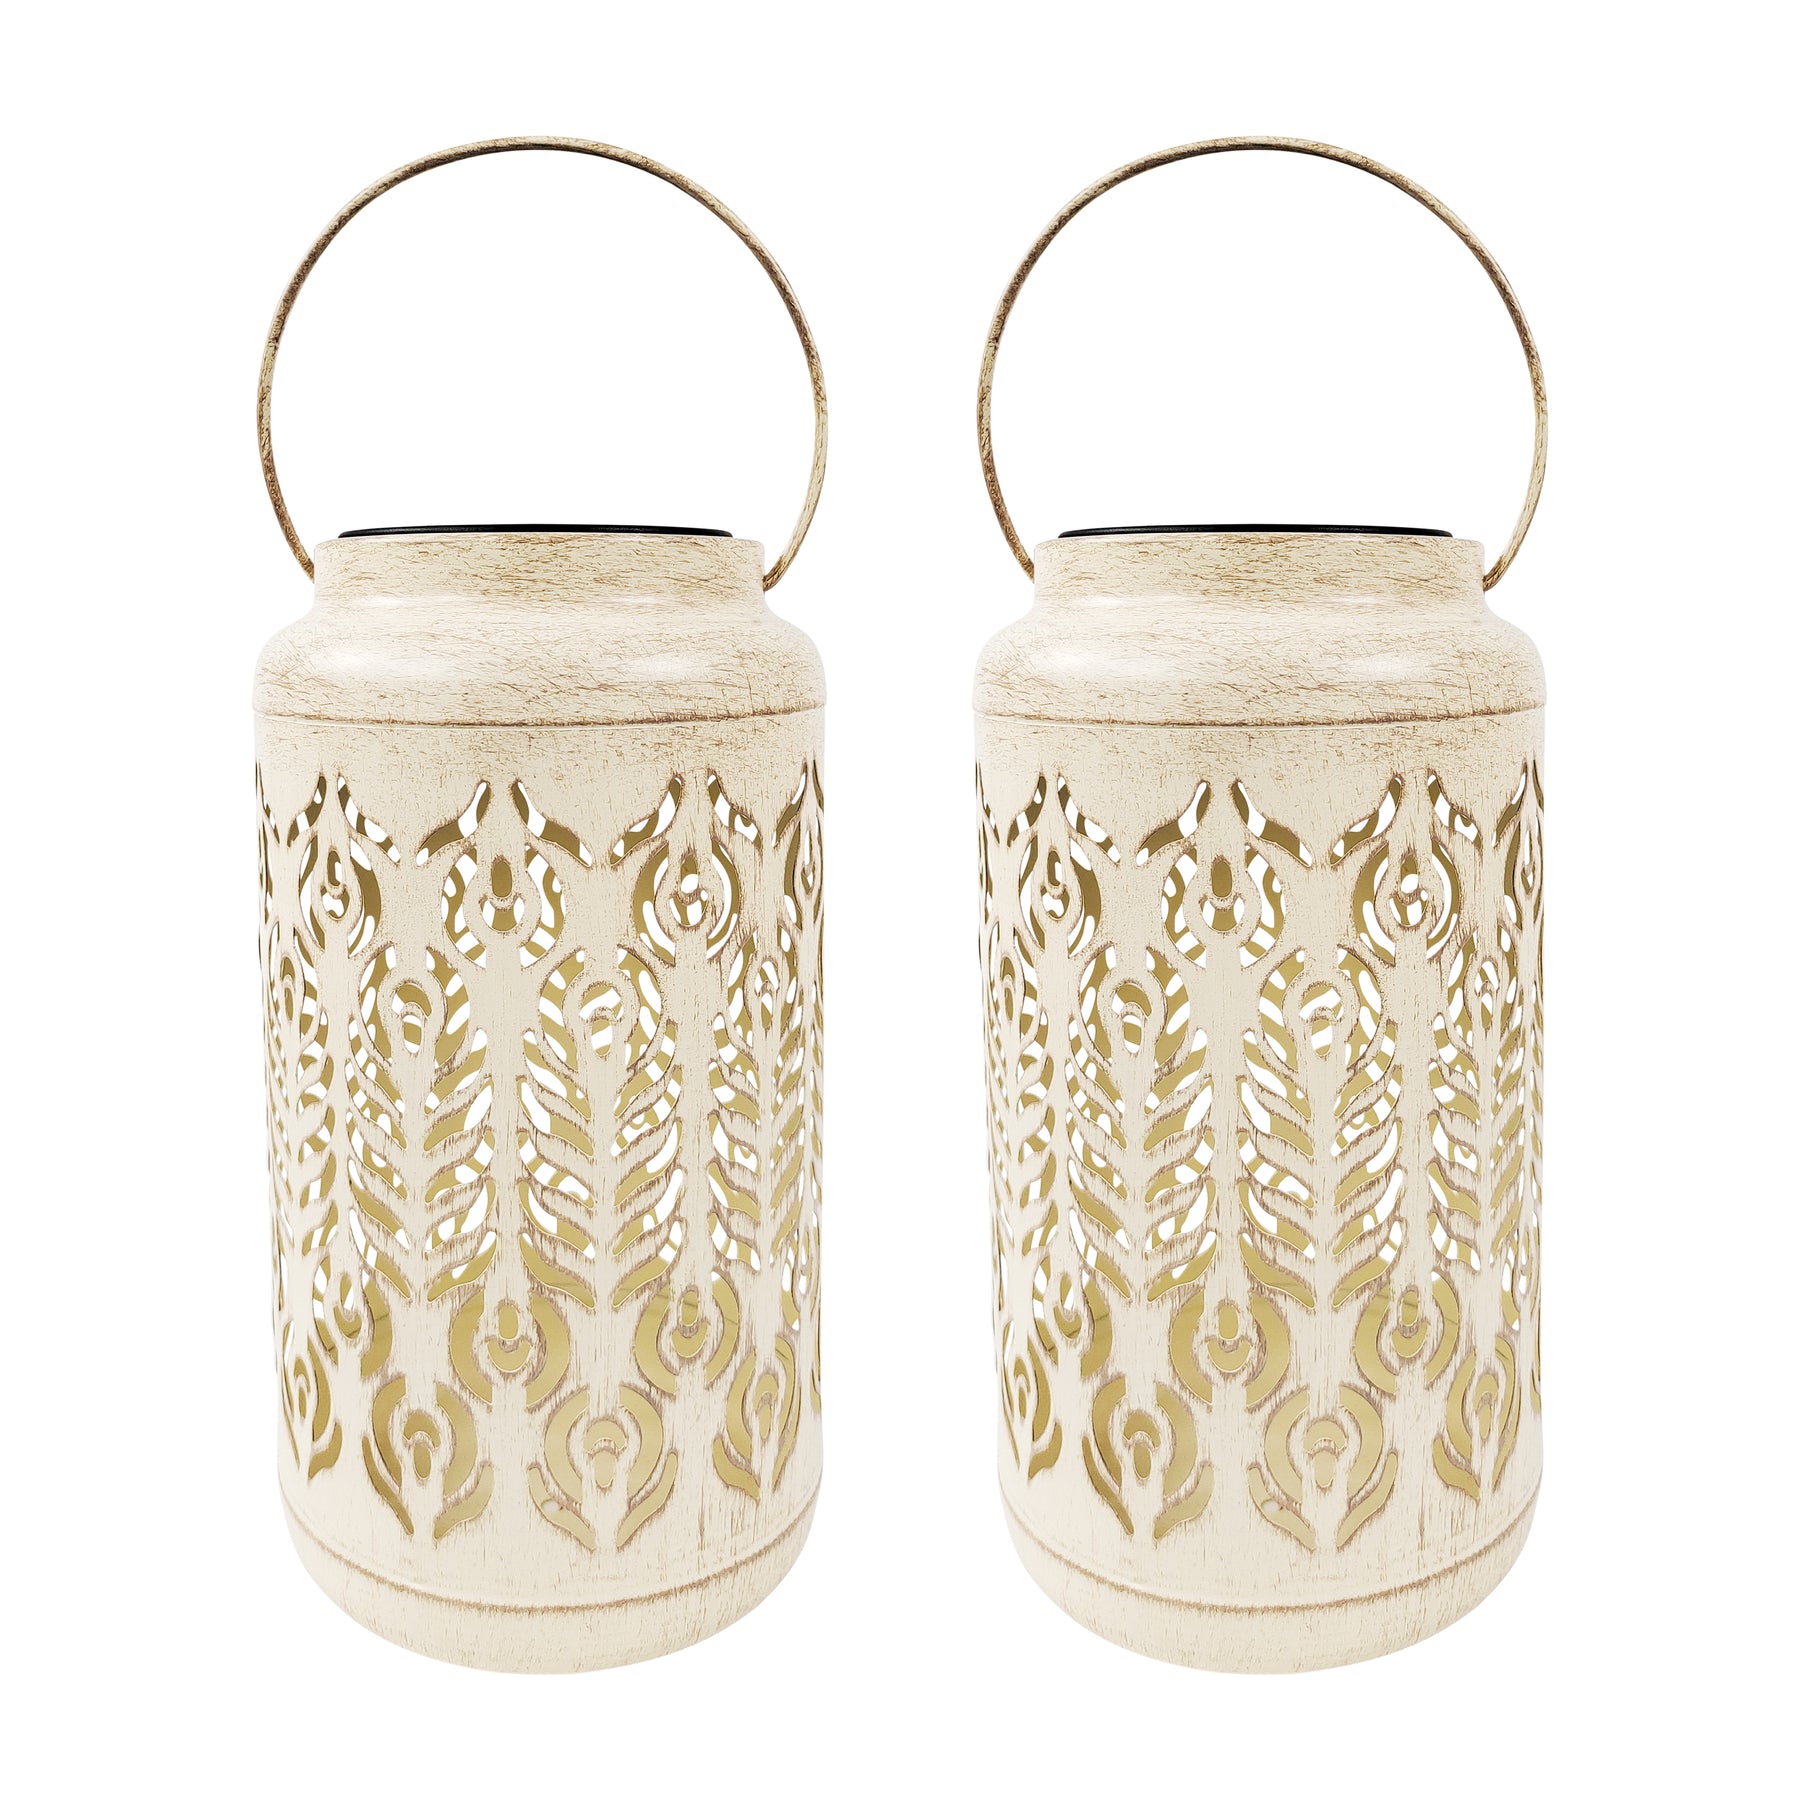 Bliss Outdoors 9-inch Tall 2-Pack Hanging and Tabletop Decorative Solar LED Lantern with Unique Phoenix Feather Design and Antique Hand Painted Finish in the Antique White variation.